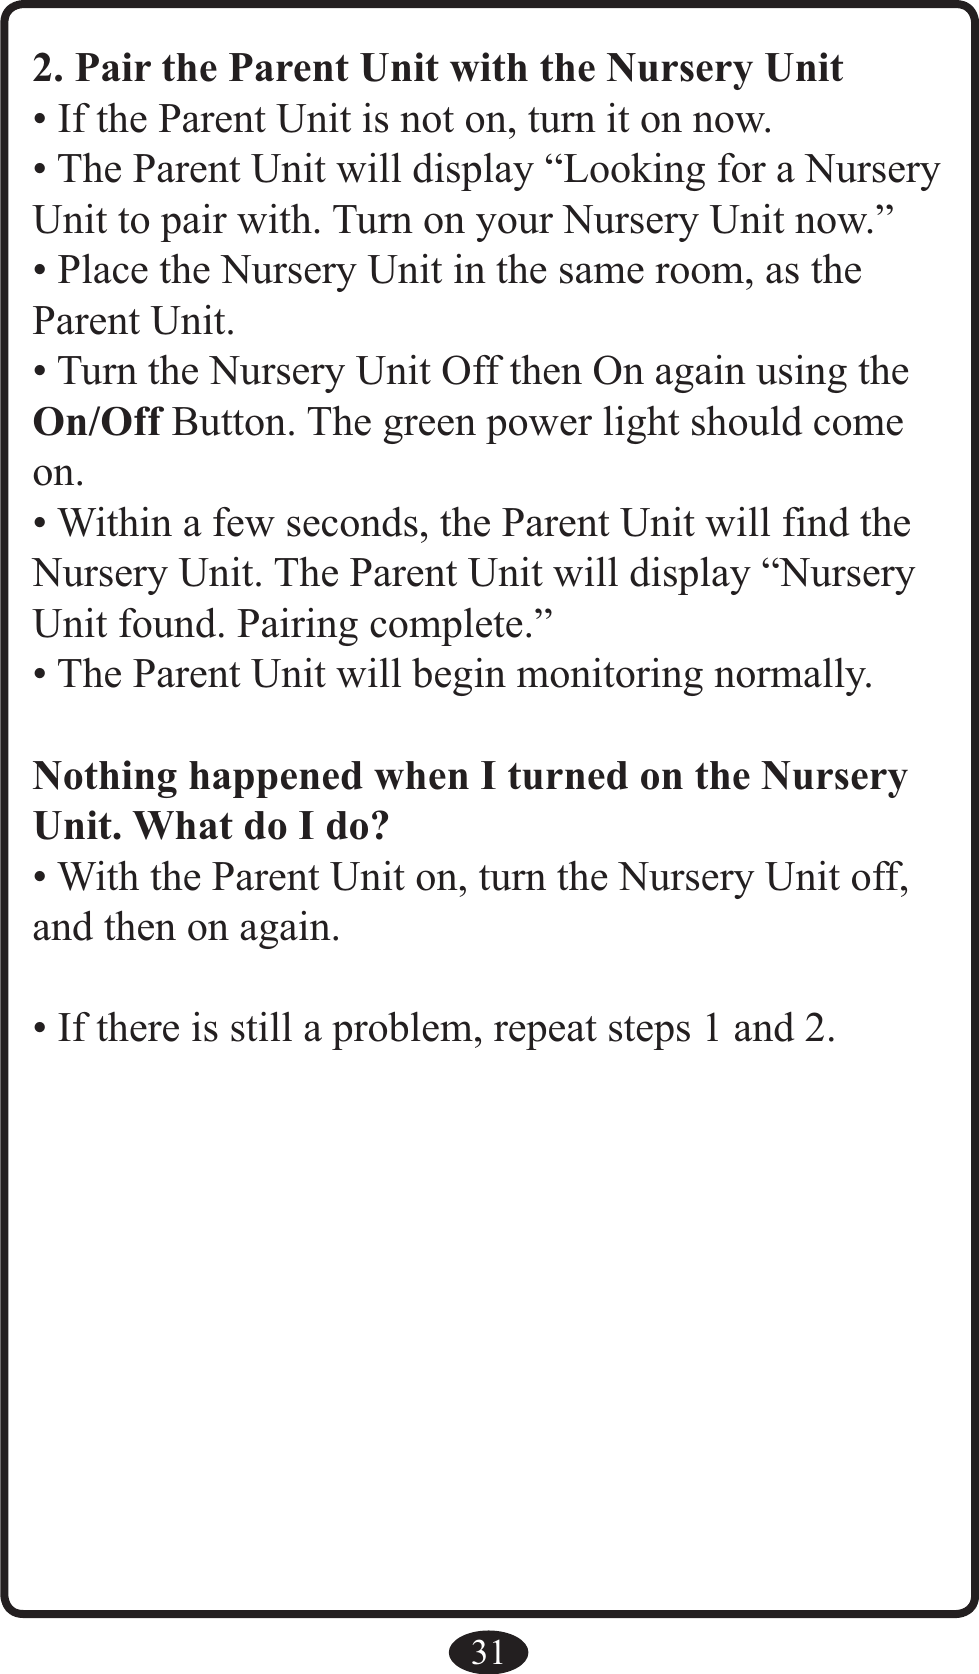 312. Pair the Parent Unit with the Nursery Unit• If the Parent Unit is not on, turn it on now.• The Parent Unit will display “Looking for a Nursery Unit to pair with. Turn on your Nursery Unit now.”• Place the Nursery Unit in the same room, as the  Parent Unit.• Turn the Nursery Unit Off then On again using the On/Off Button. The green power light should come on.• Within a few seconds, the Parent Unit will find the Nursery Unit. The Parent Unit will display “Nursery Unit found. Pairing complete.”• The Parent Unit will begin monitoring normally.Nothing happened when I turned on the Nursery Unit. What do I do?• With the Parent Unit on, turn the Nursery Unit off, and then on again.• If there is still a problem, repeat steps 1 and 2.